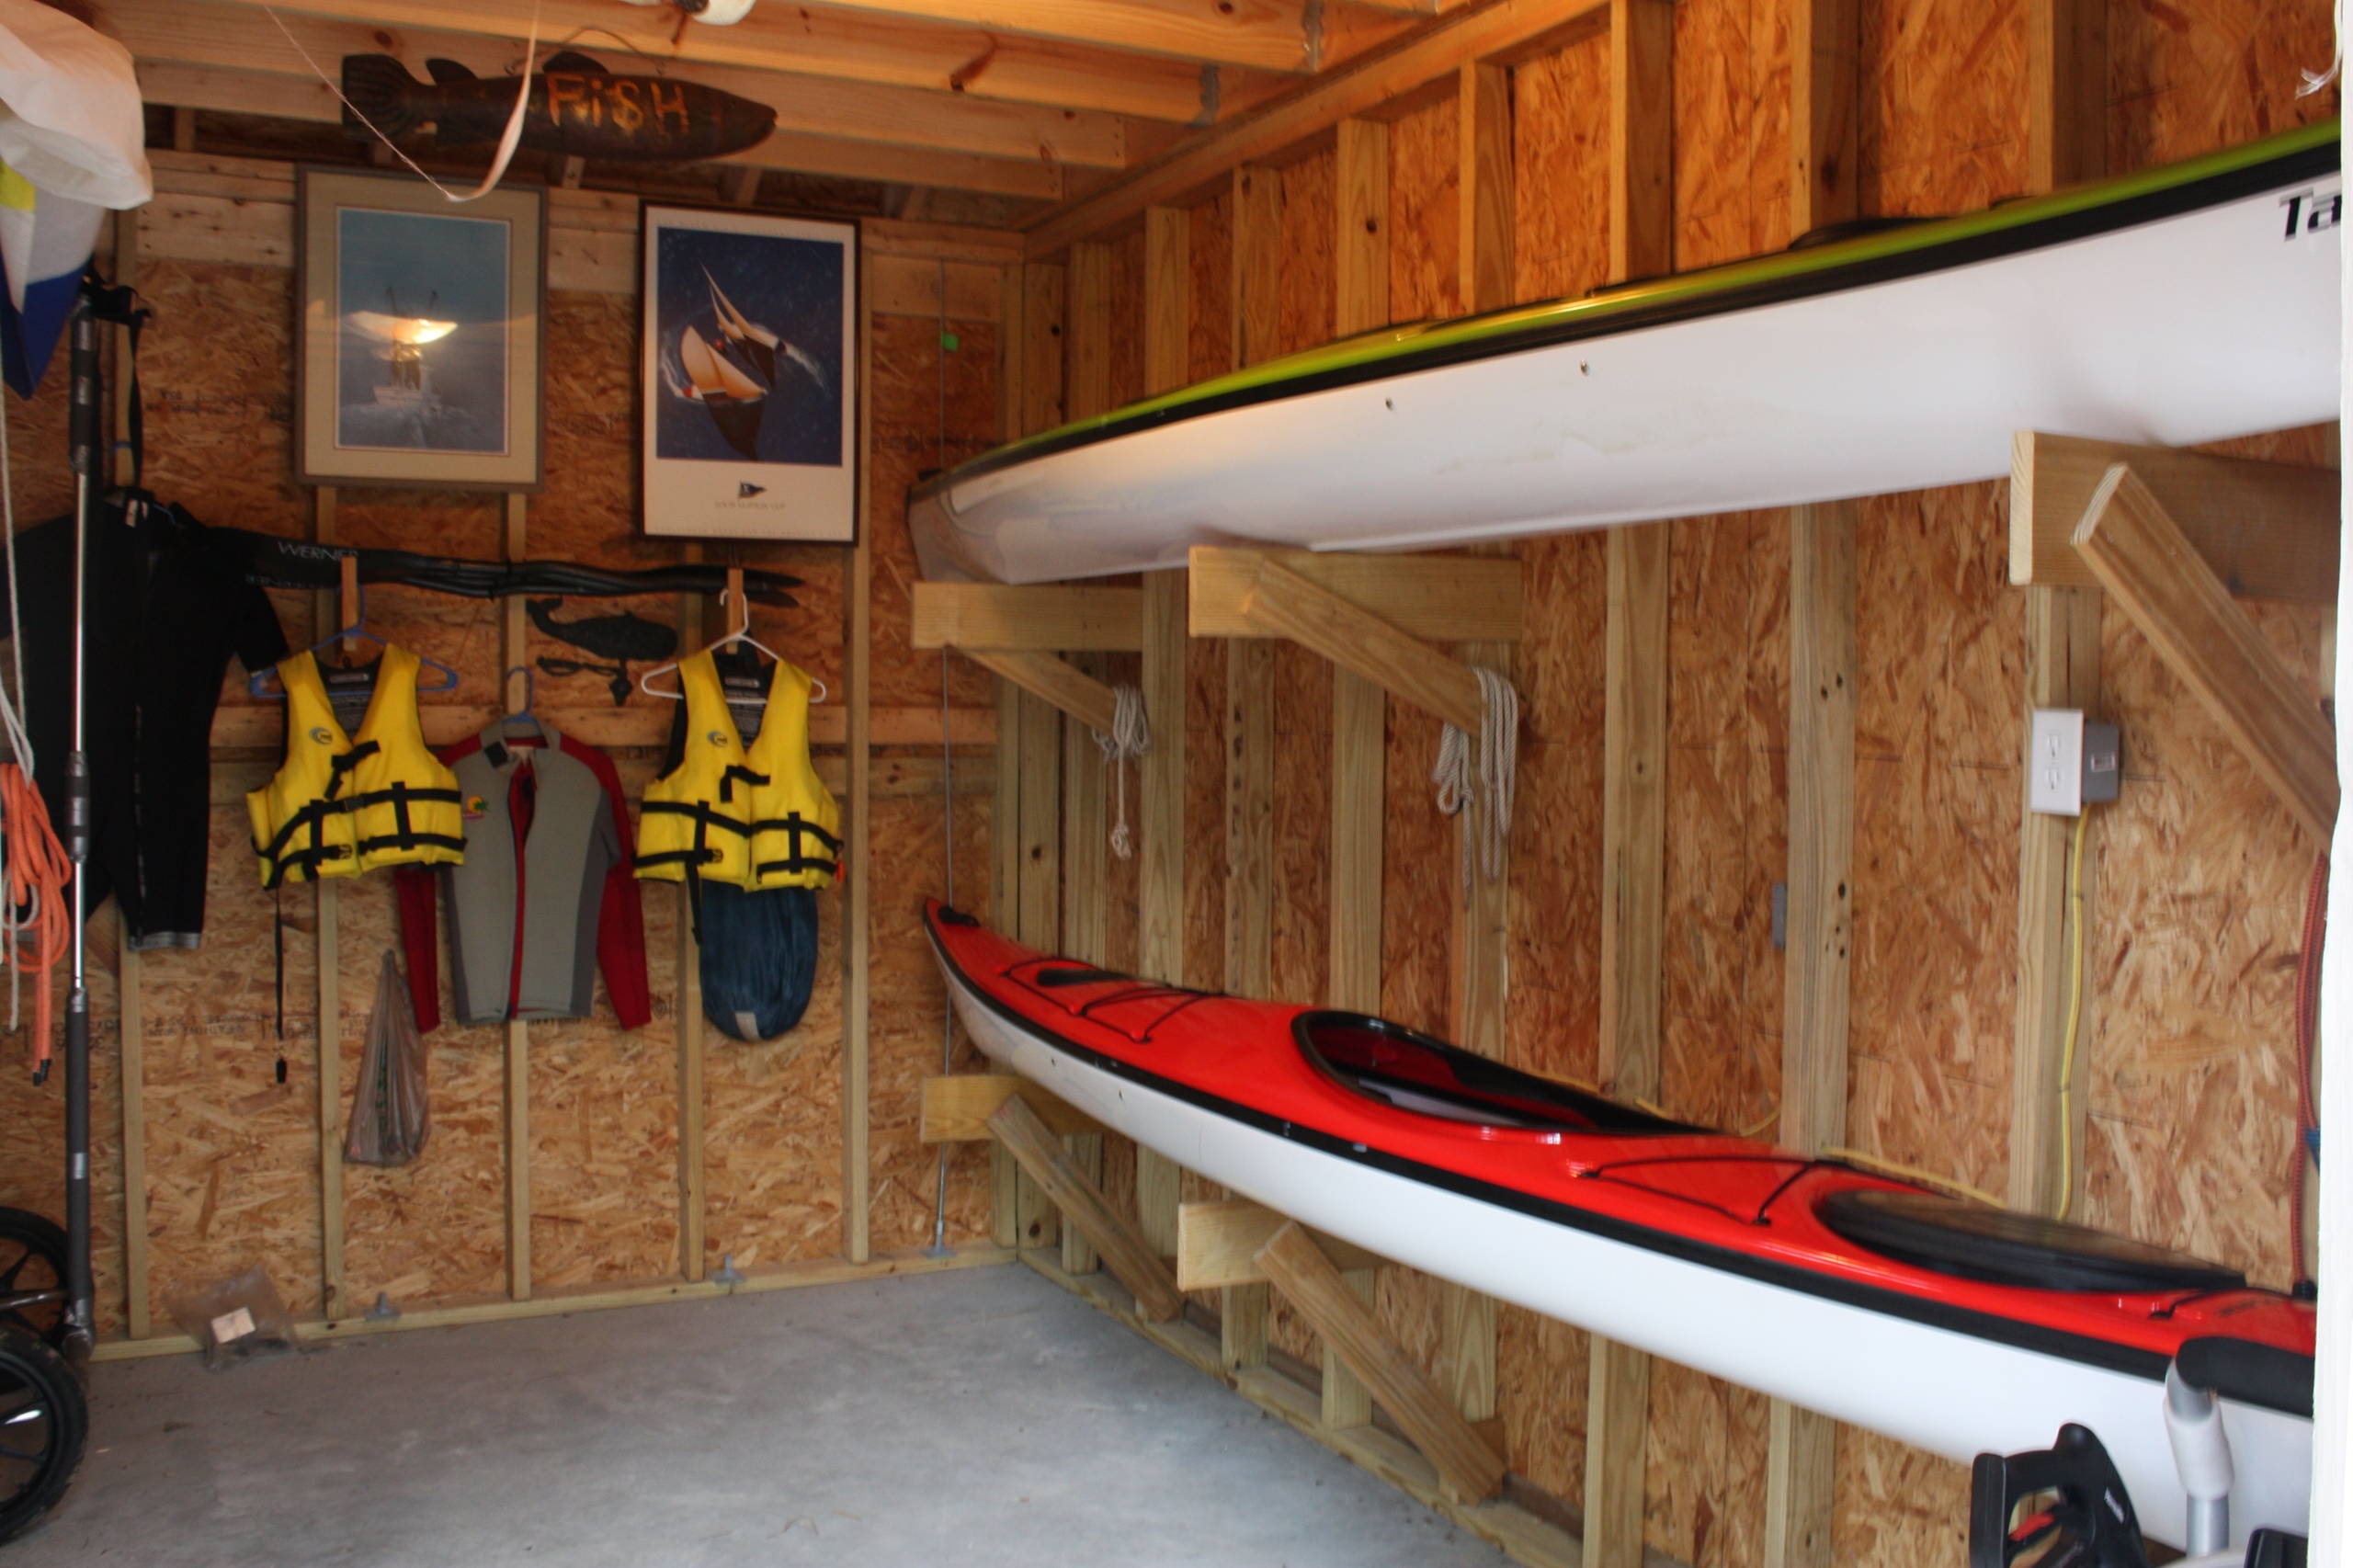 Boat Shed - Photos & Ideas